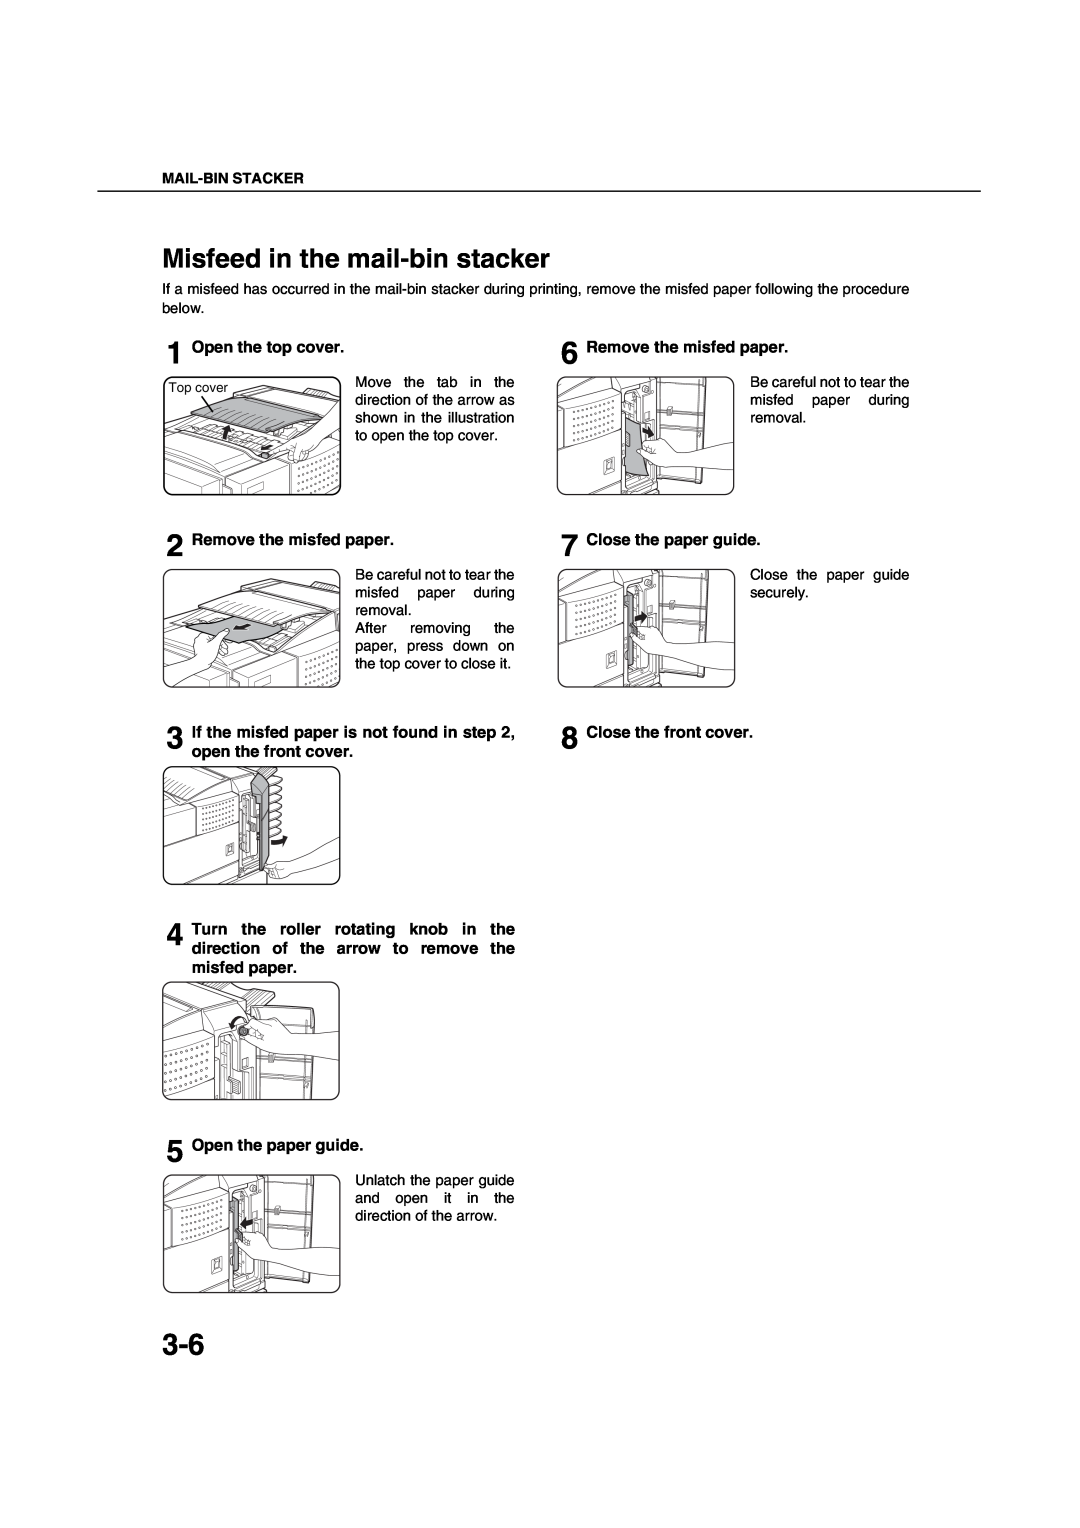 Sharp AR-M451N Misfeed in the mail-bin stacker, Open the top cover, Remove the misfed paper, Close the paper guide 